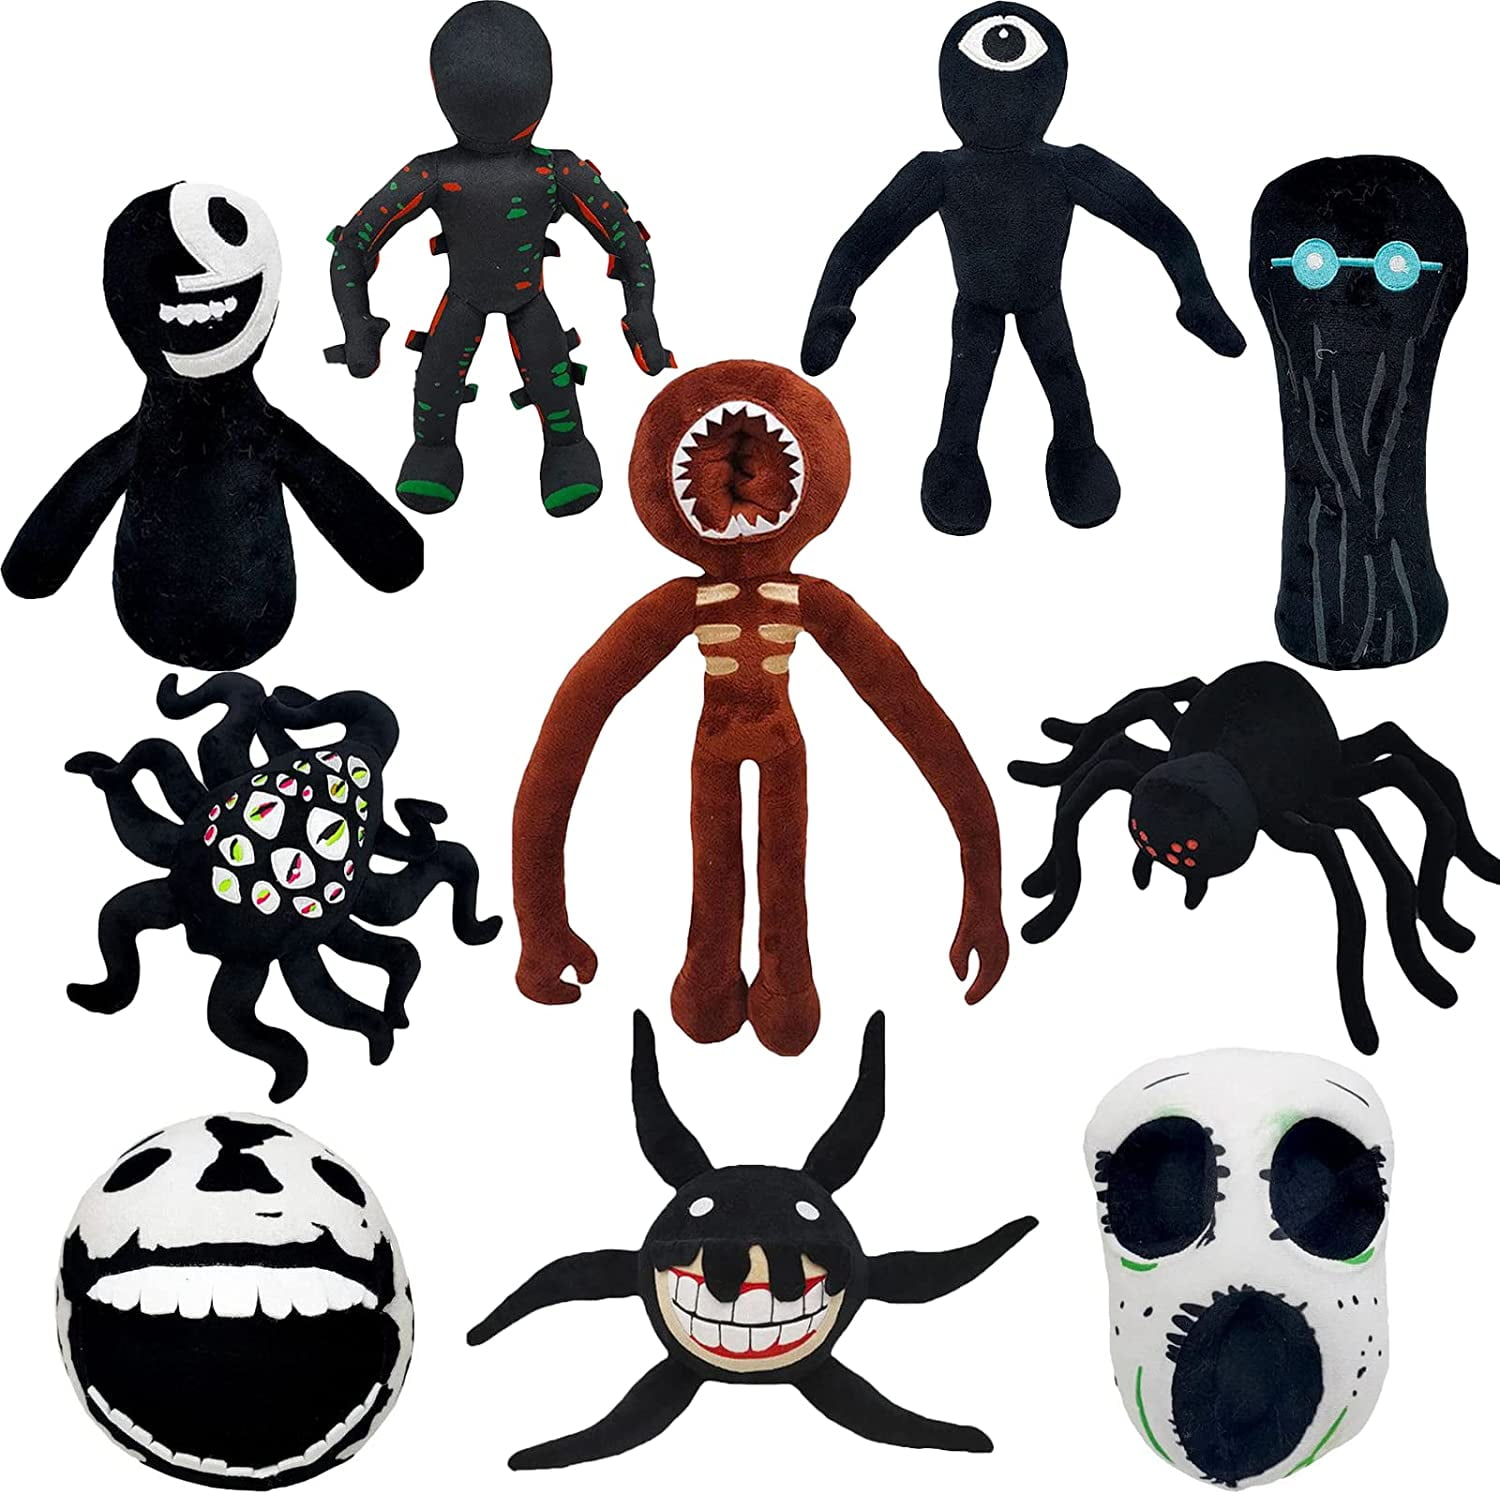  ULTHOOL Doors Plush, 11.81 Inch Horror Seek Door Plushies Toys,  Soft Game Monster Stuffed Doll for Kids and Fans(Seek from Doors) : Toys &  Games